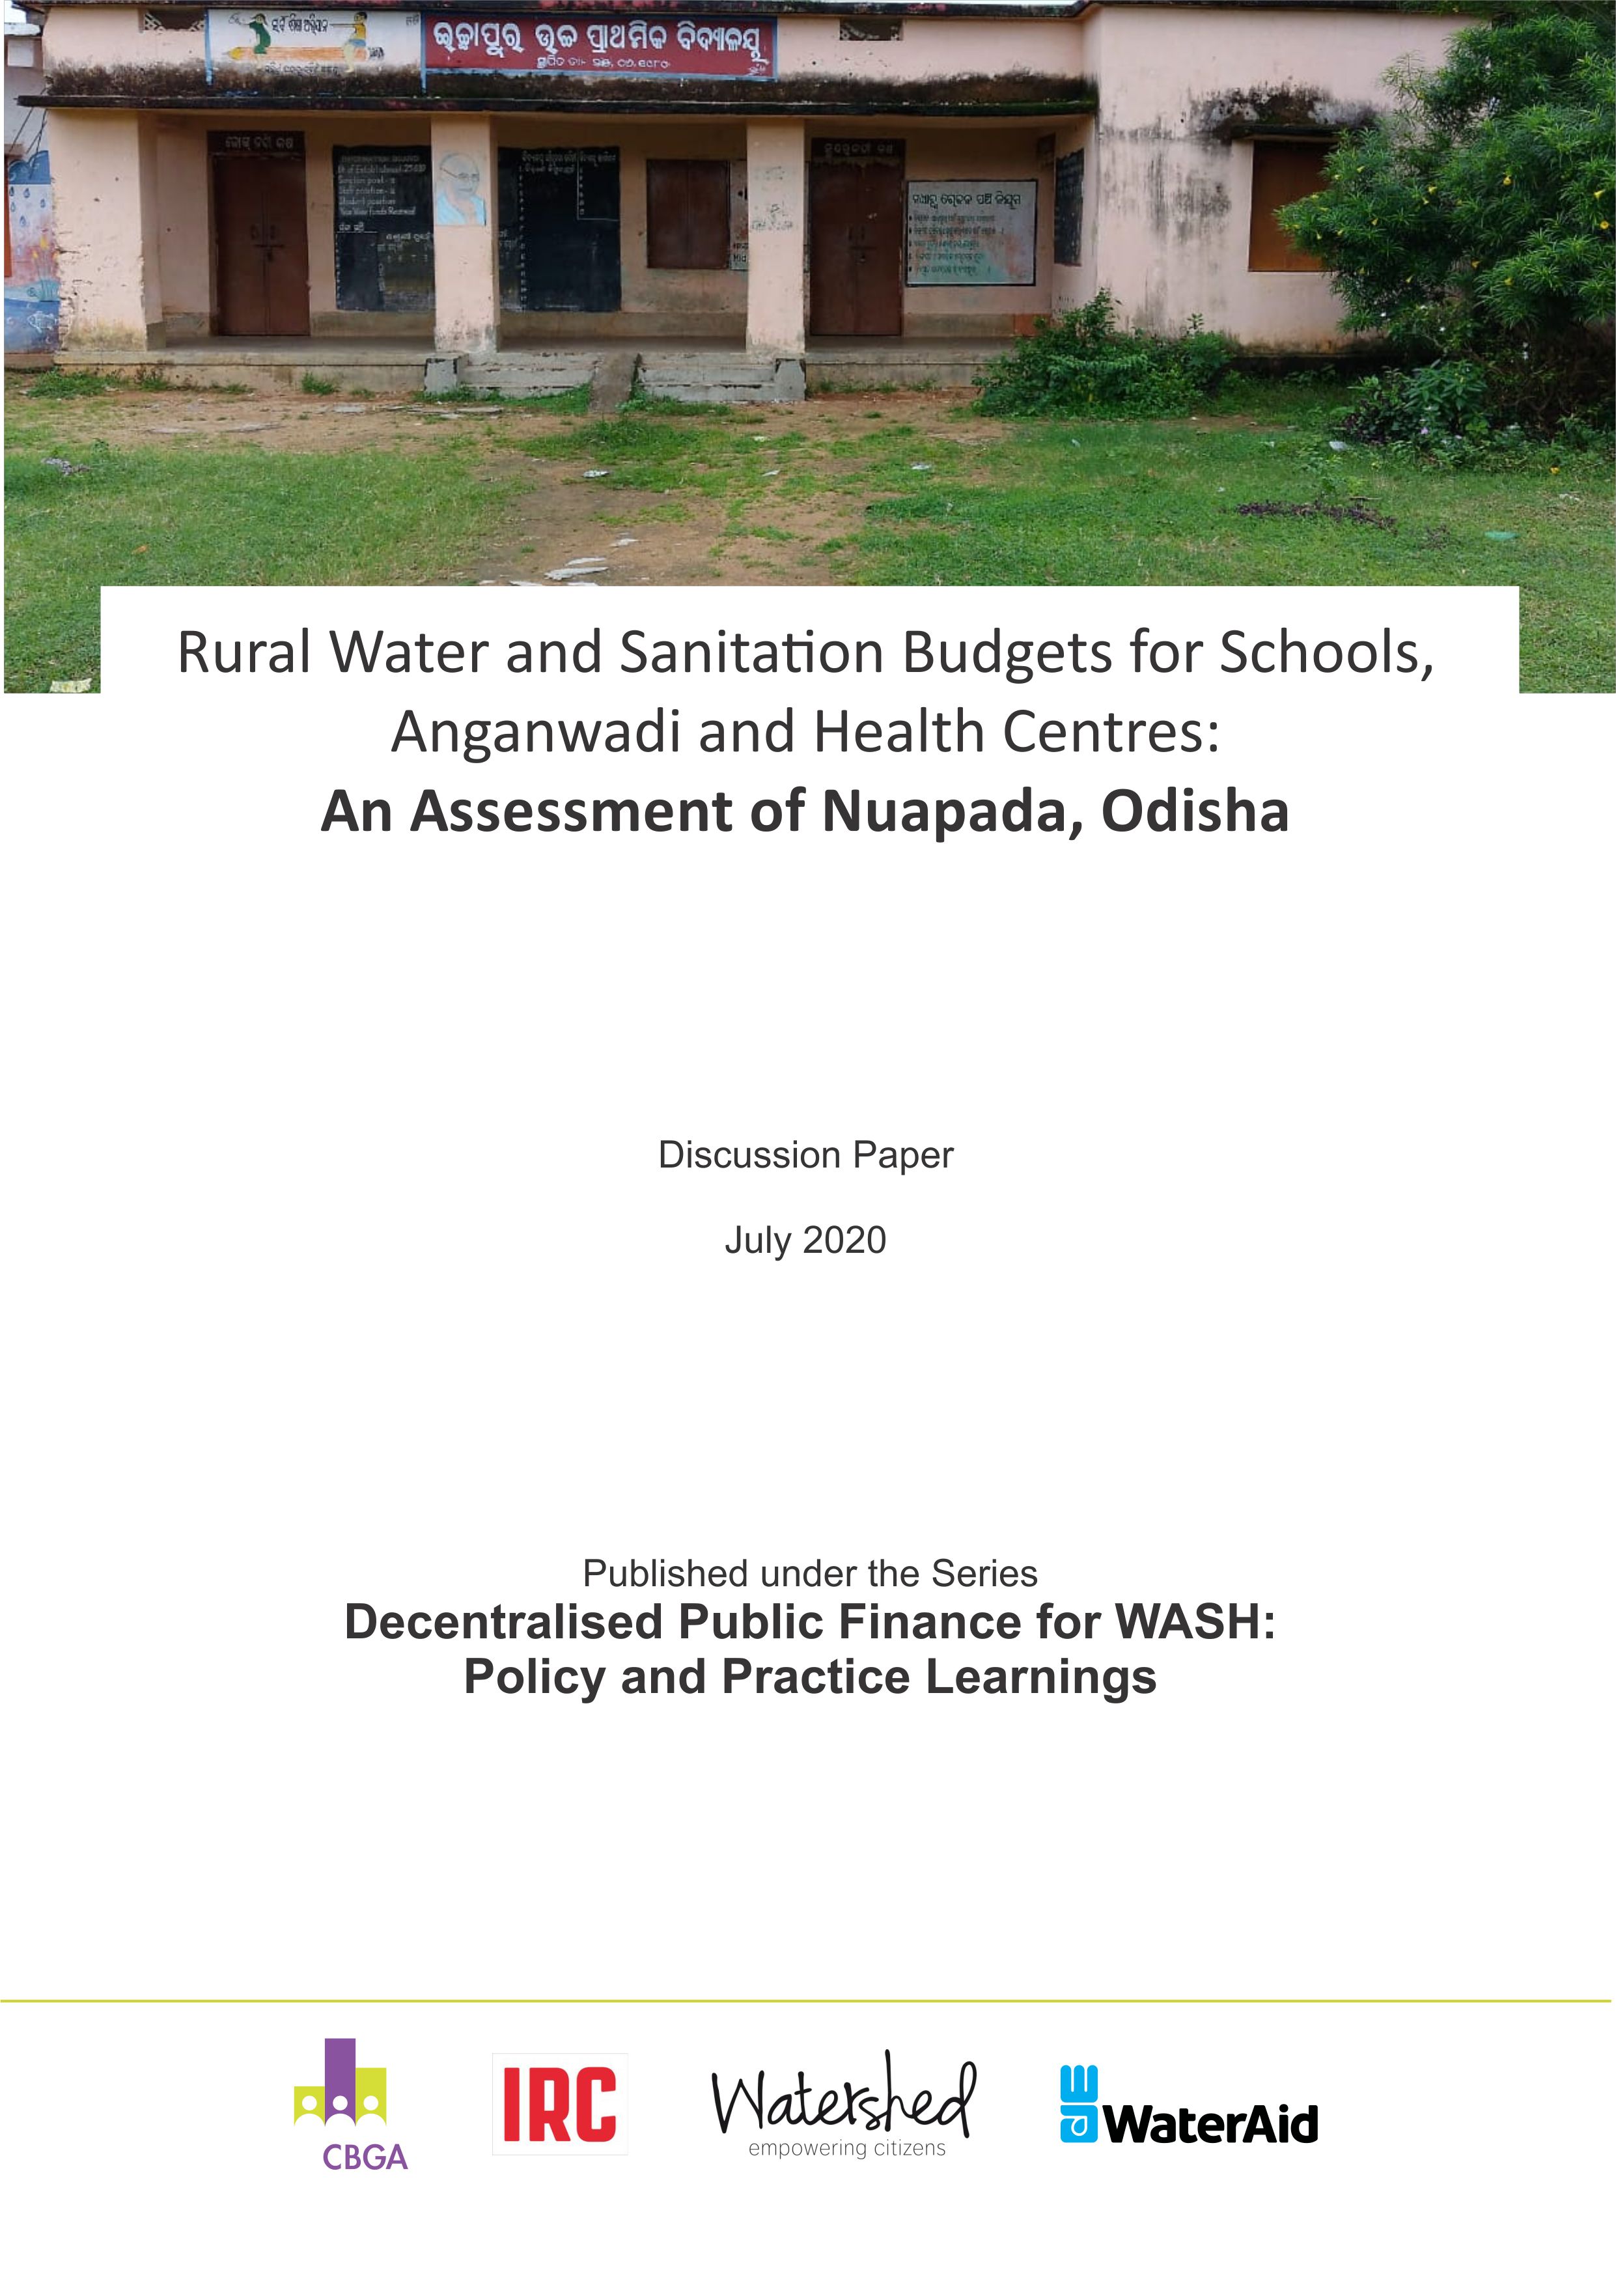 Budgets for WASH in Social Sector Institutions - Nuapada